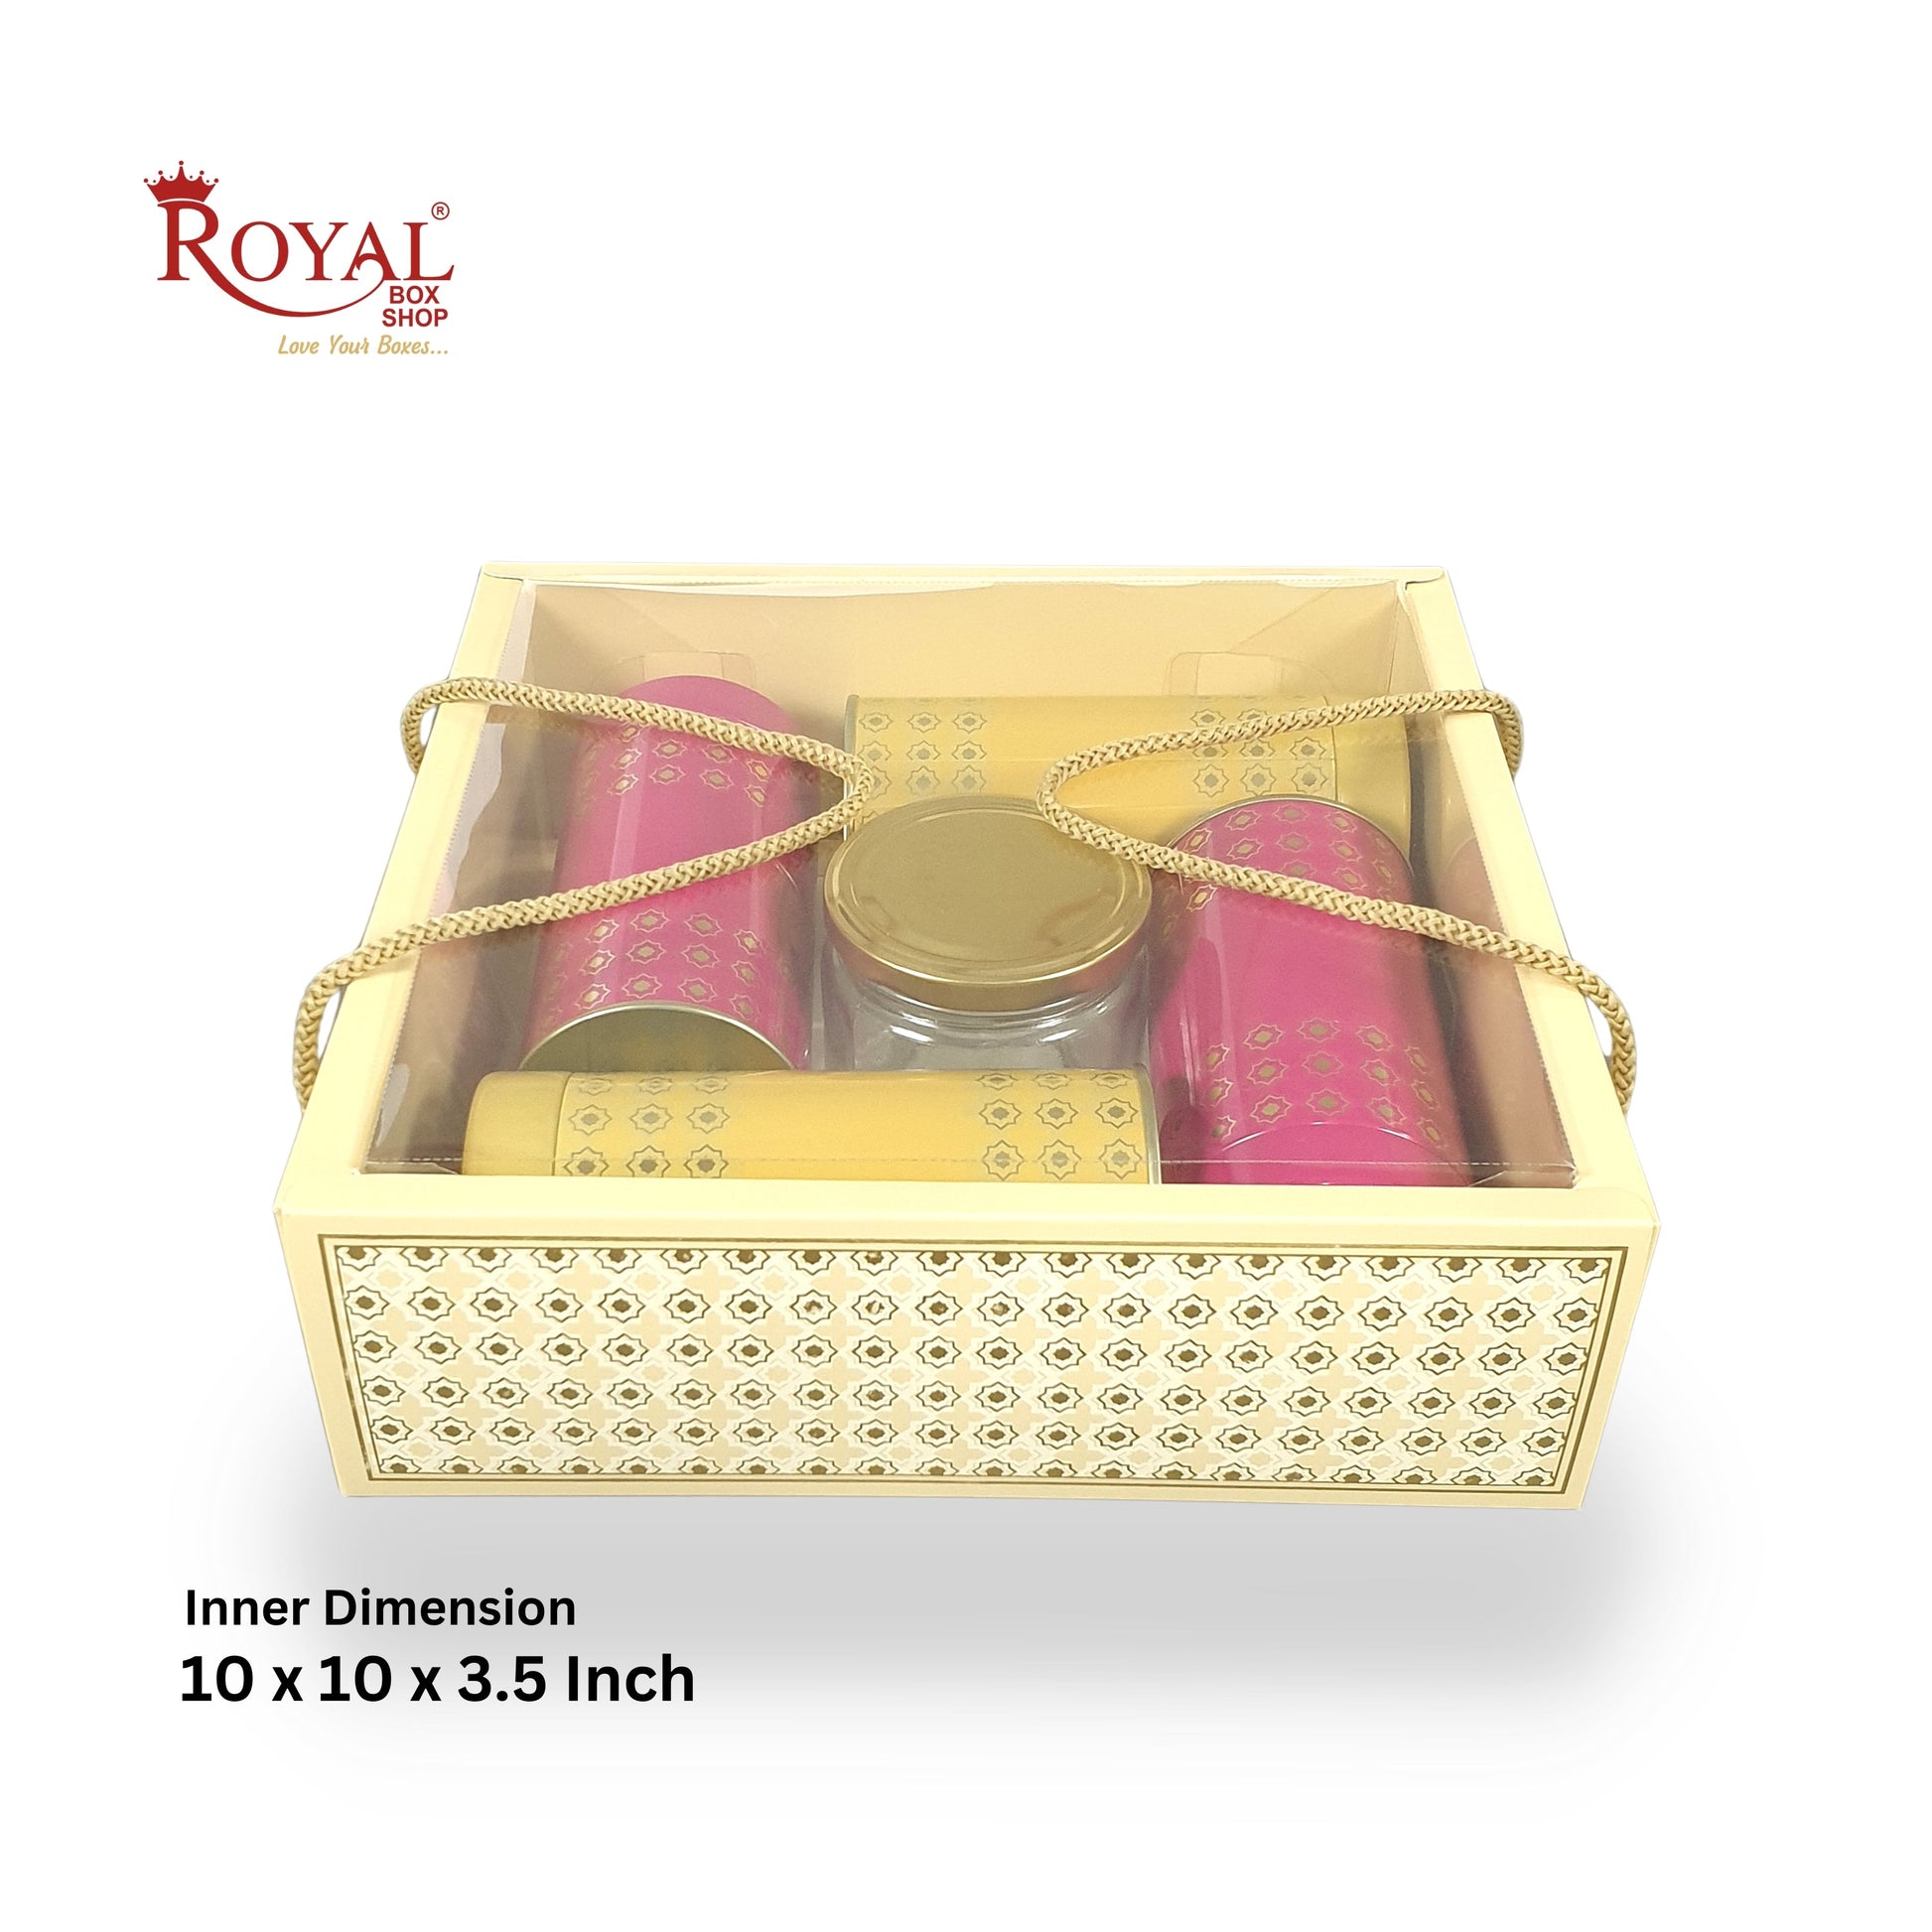 Premium Gift Hamper Bags with Transparent Lid I 10 x 10 x 3.5 inches I Beige Star Gold Foil Print I Wedding Gifting, Party Gifts, Return favor Gifting Royal Box Shop